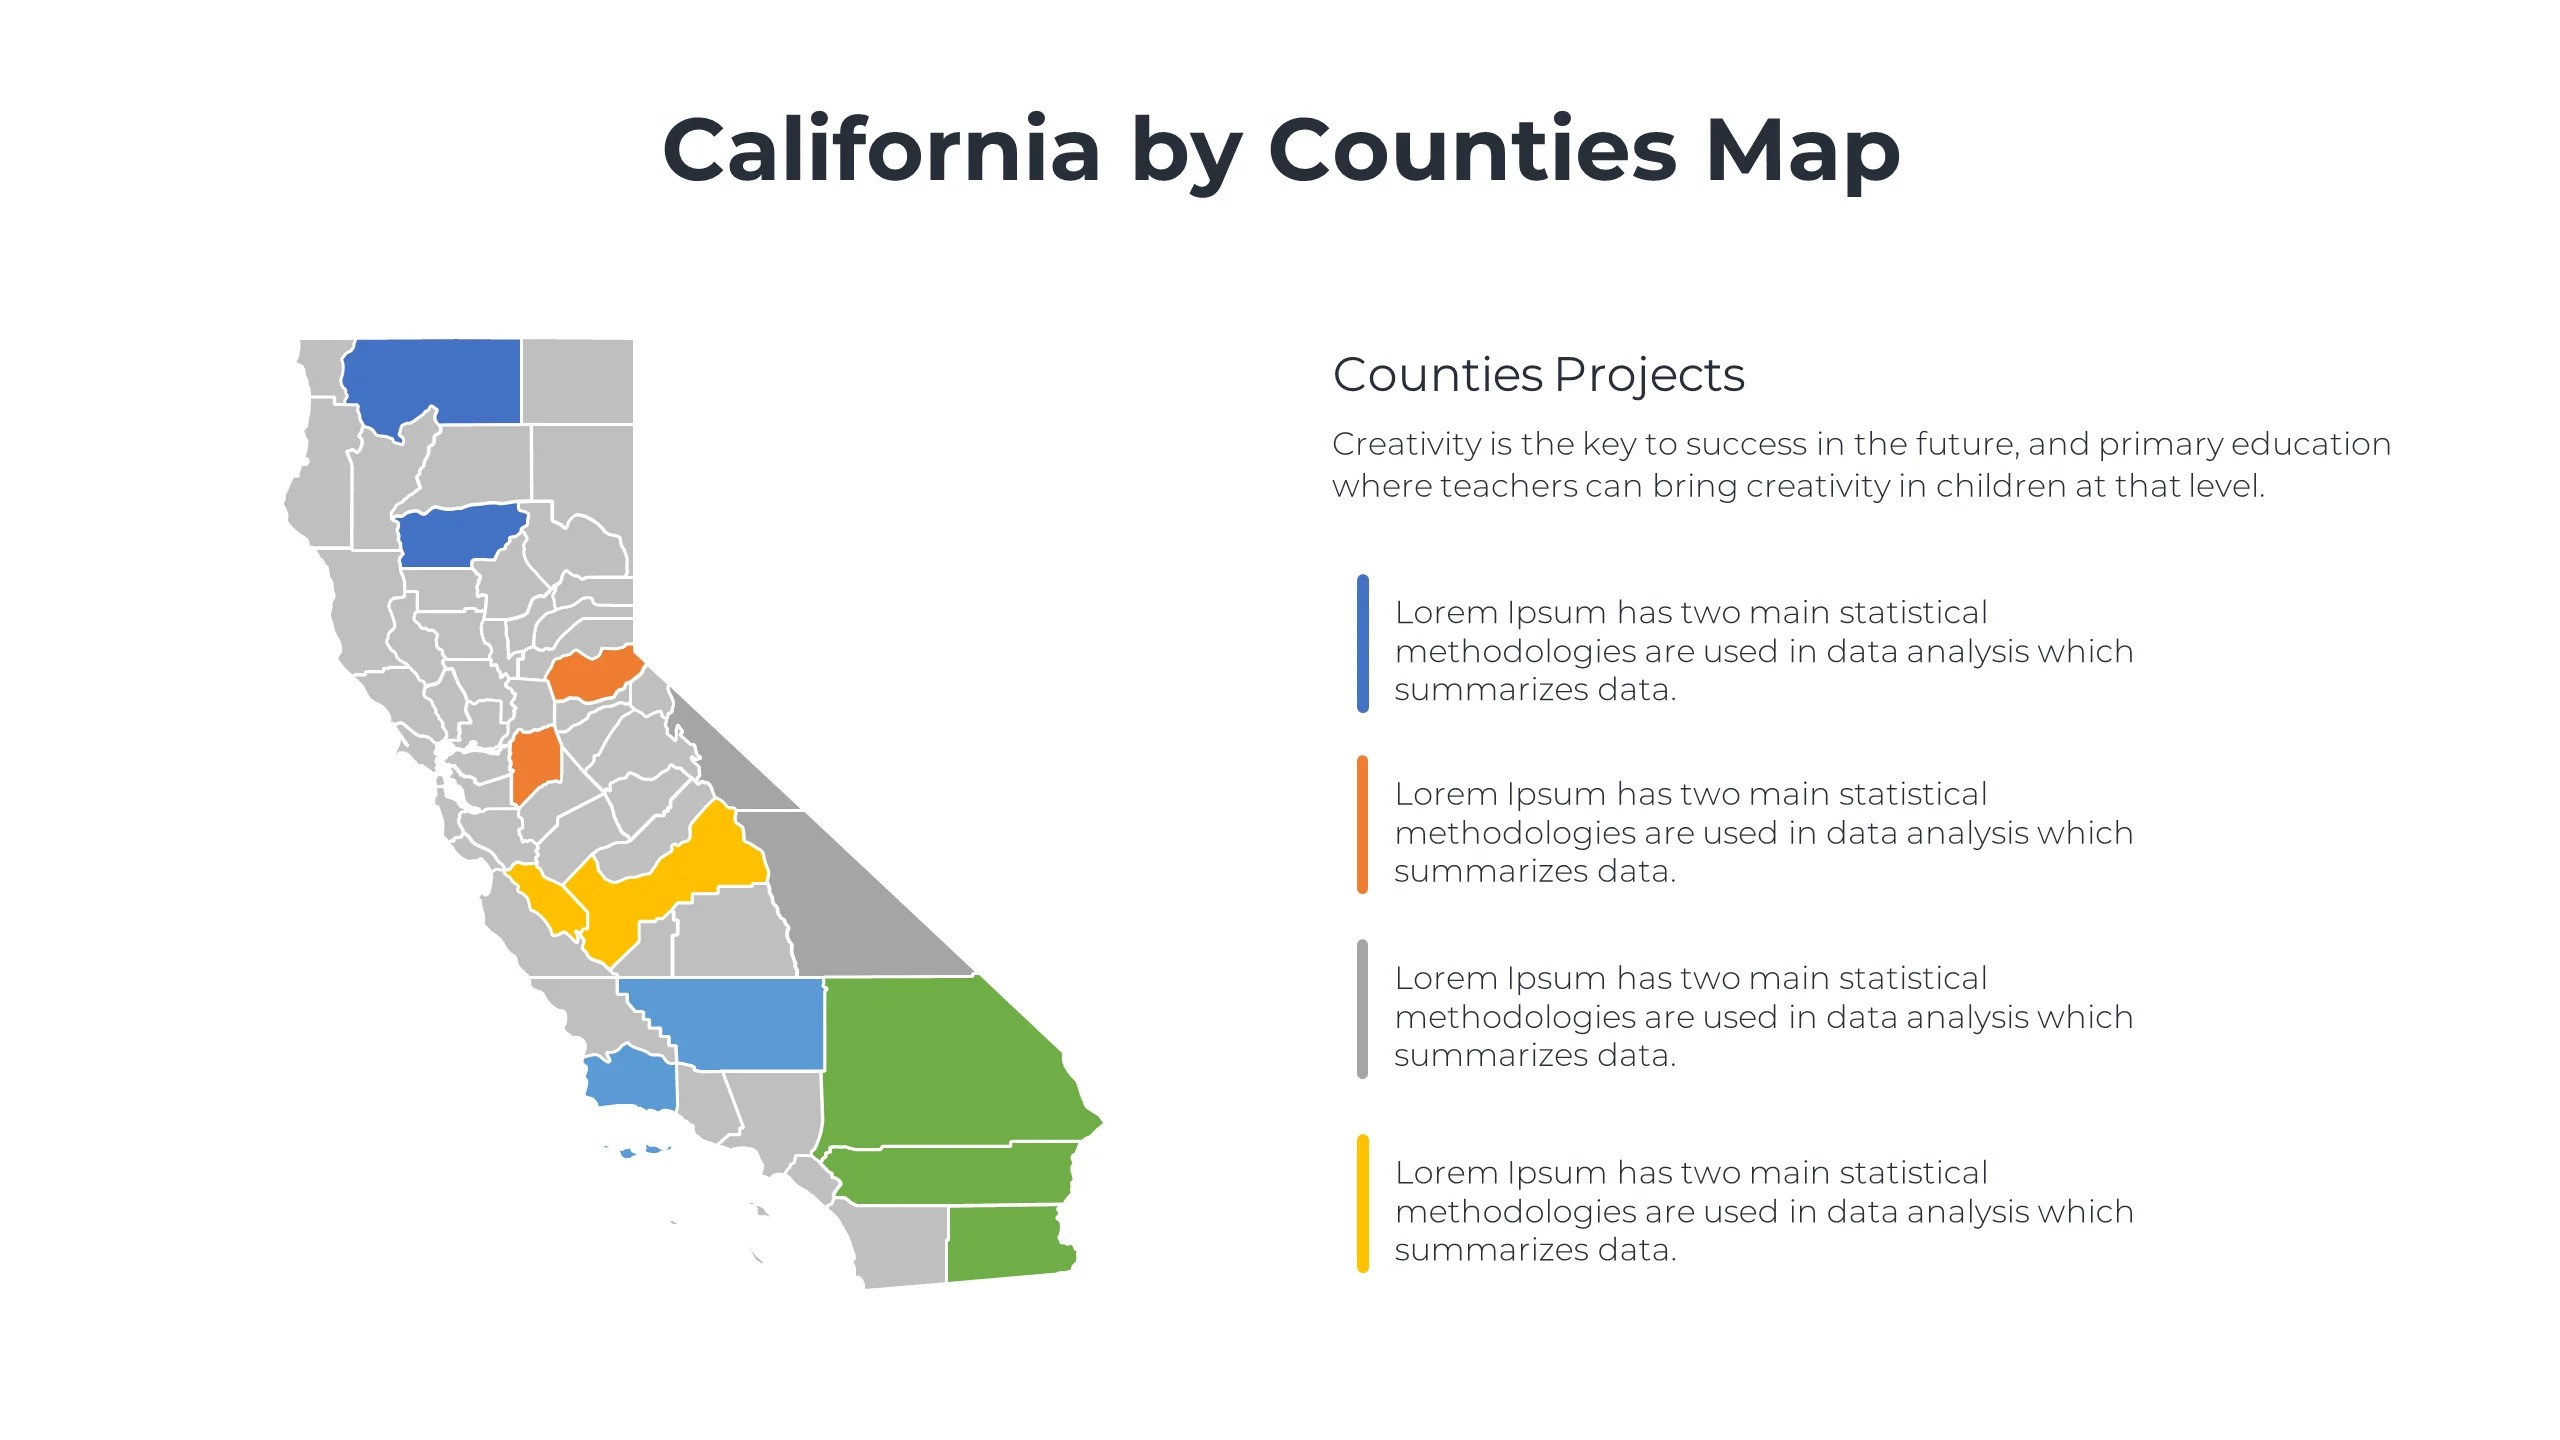 California by counties map